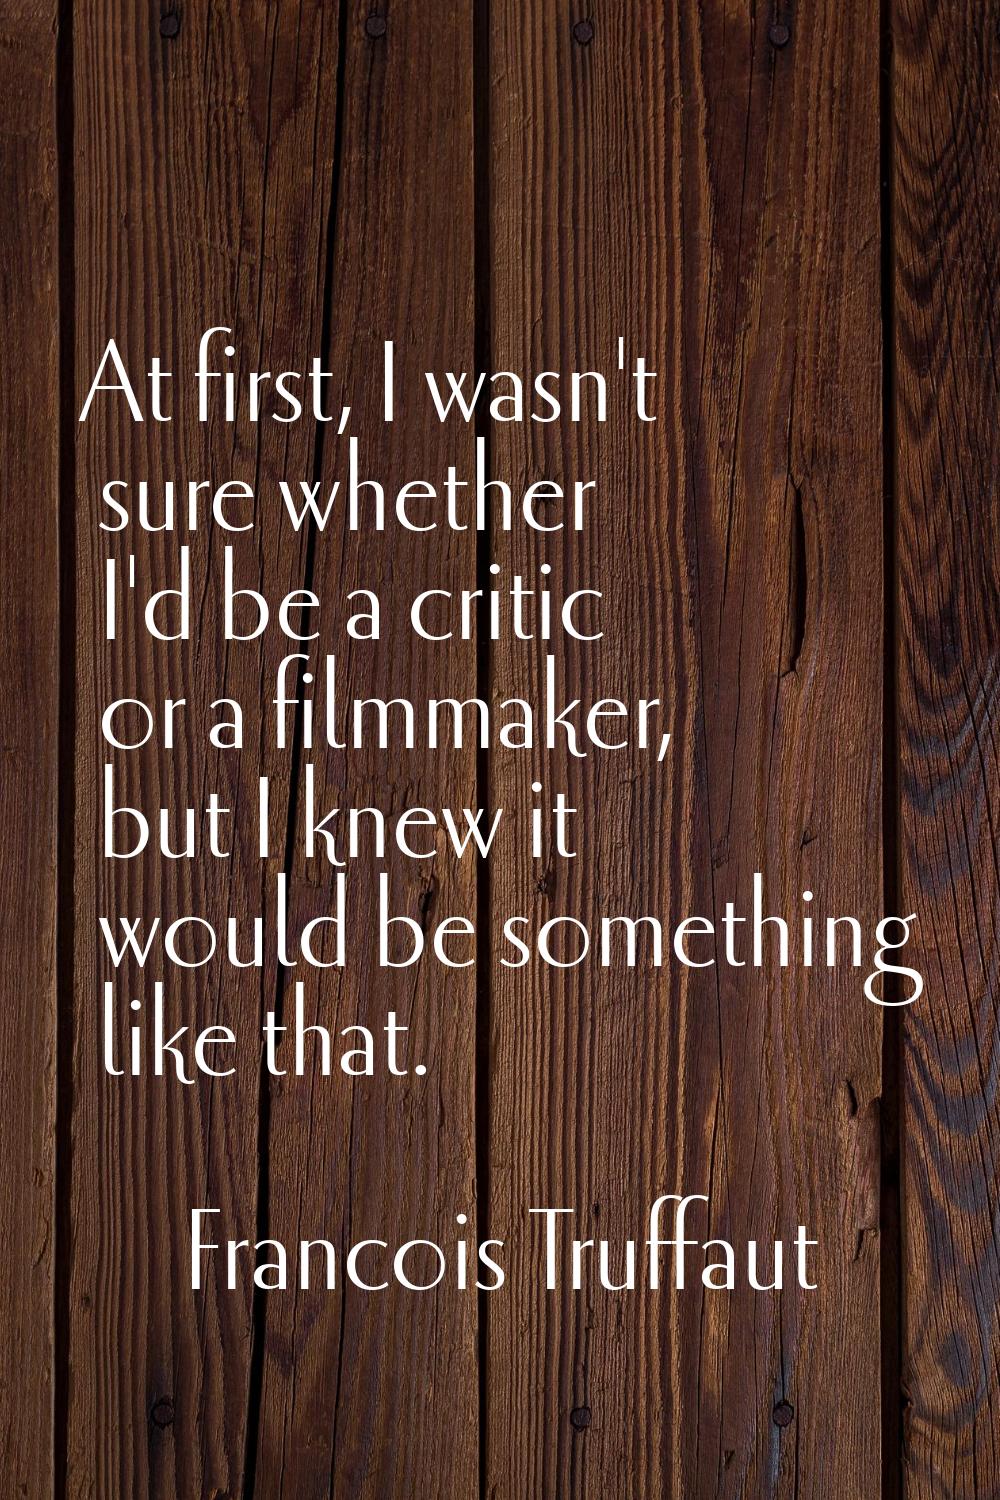 At first, I wasn't sure whether I'd be a critic or a filmmaker, but I knew it would be something li